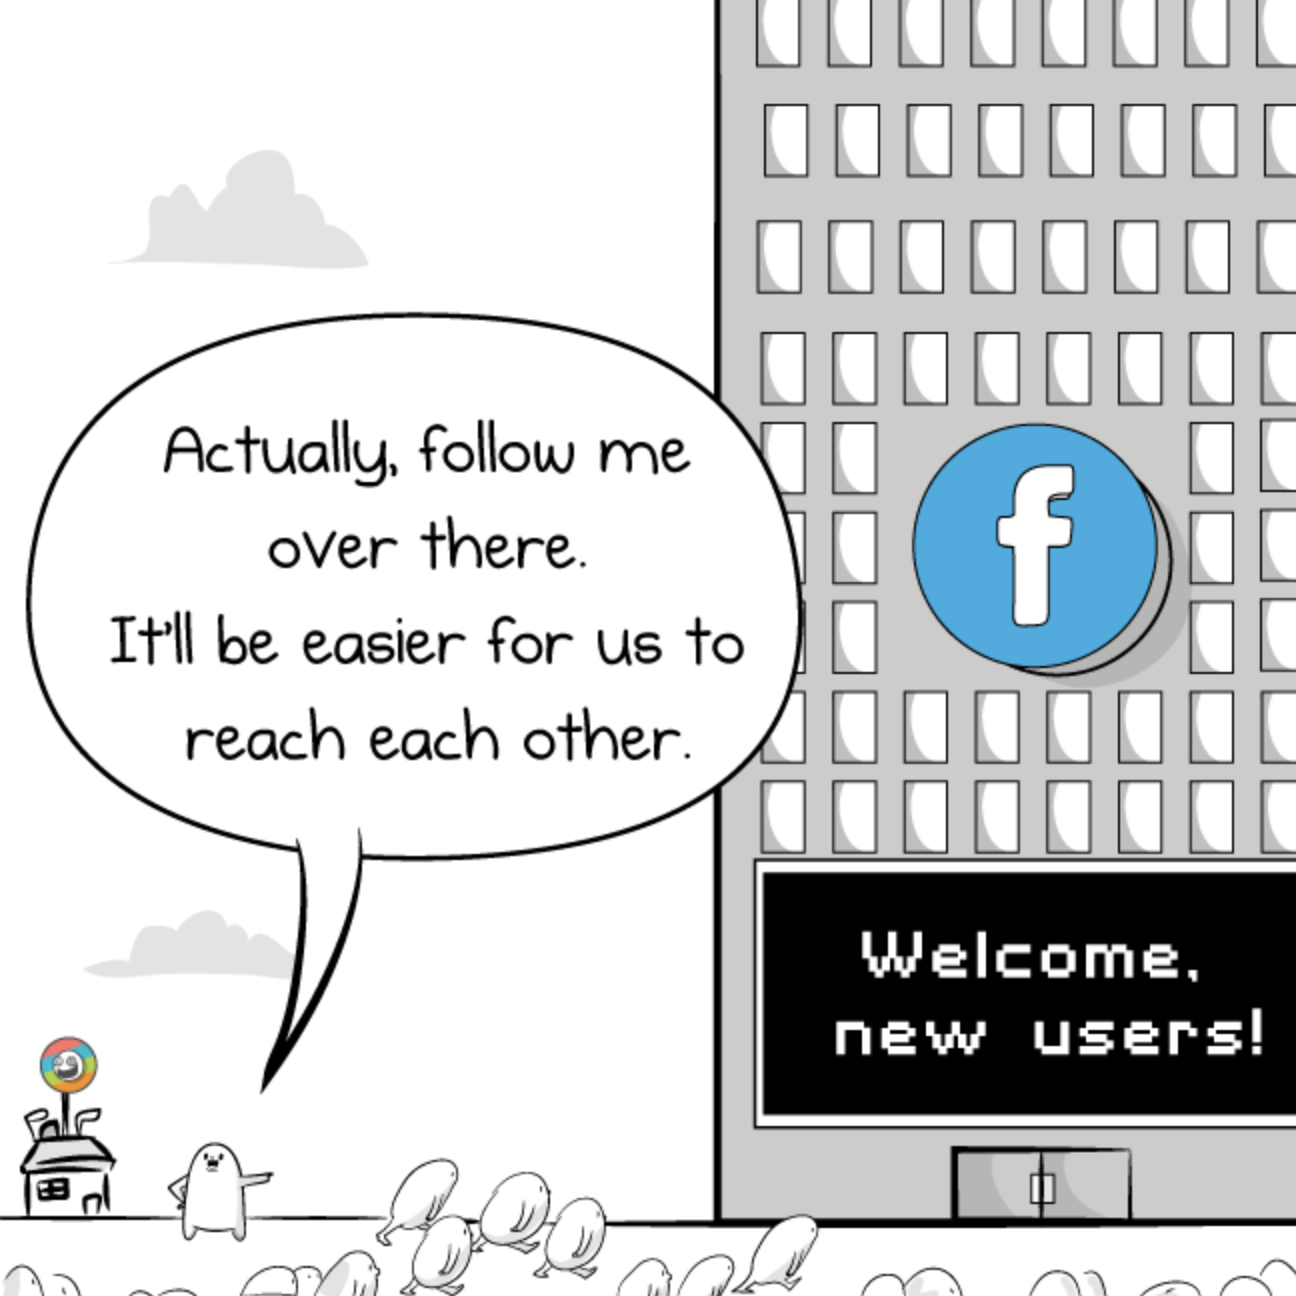 Blob screaming "Actually, follow me over there. It'll be easier for us to reach each other" pointing to Facebook.